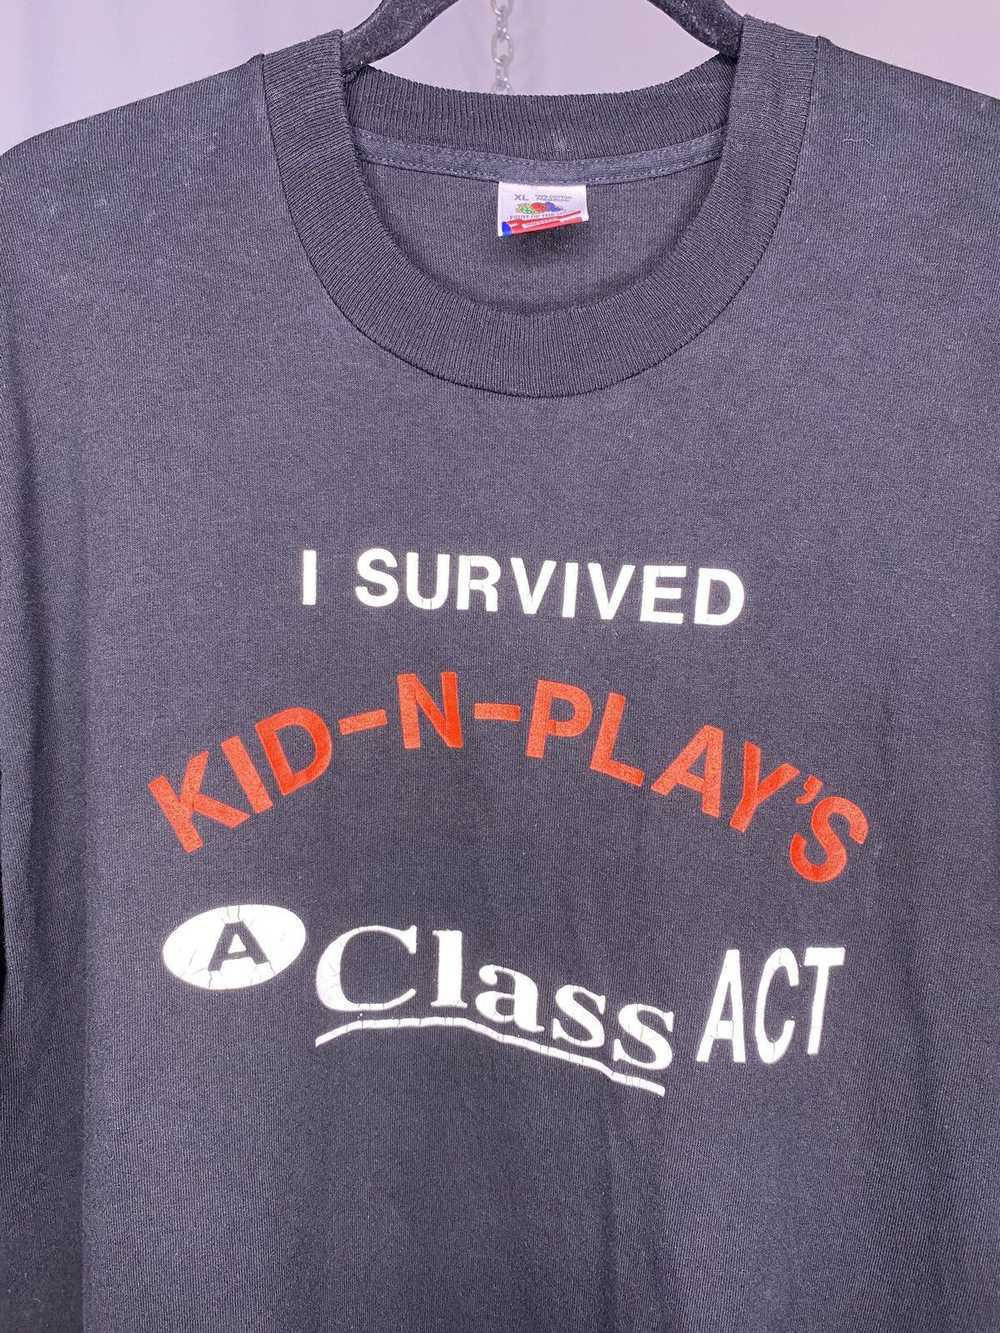 Vintage Vintage Kid-N-Plays A Class Act T Shirt - image 4